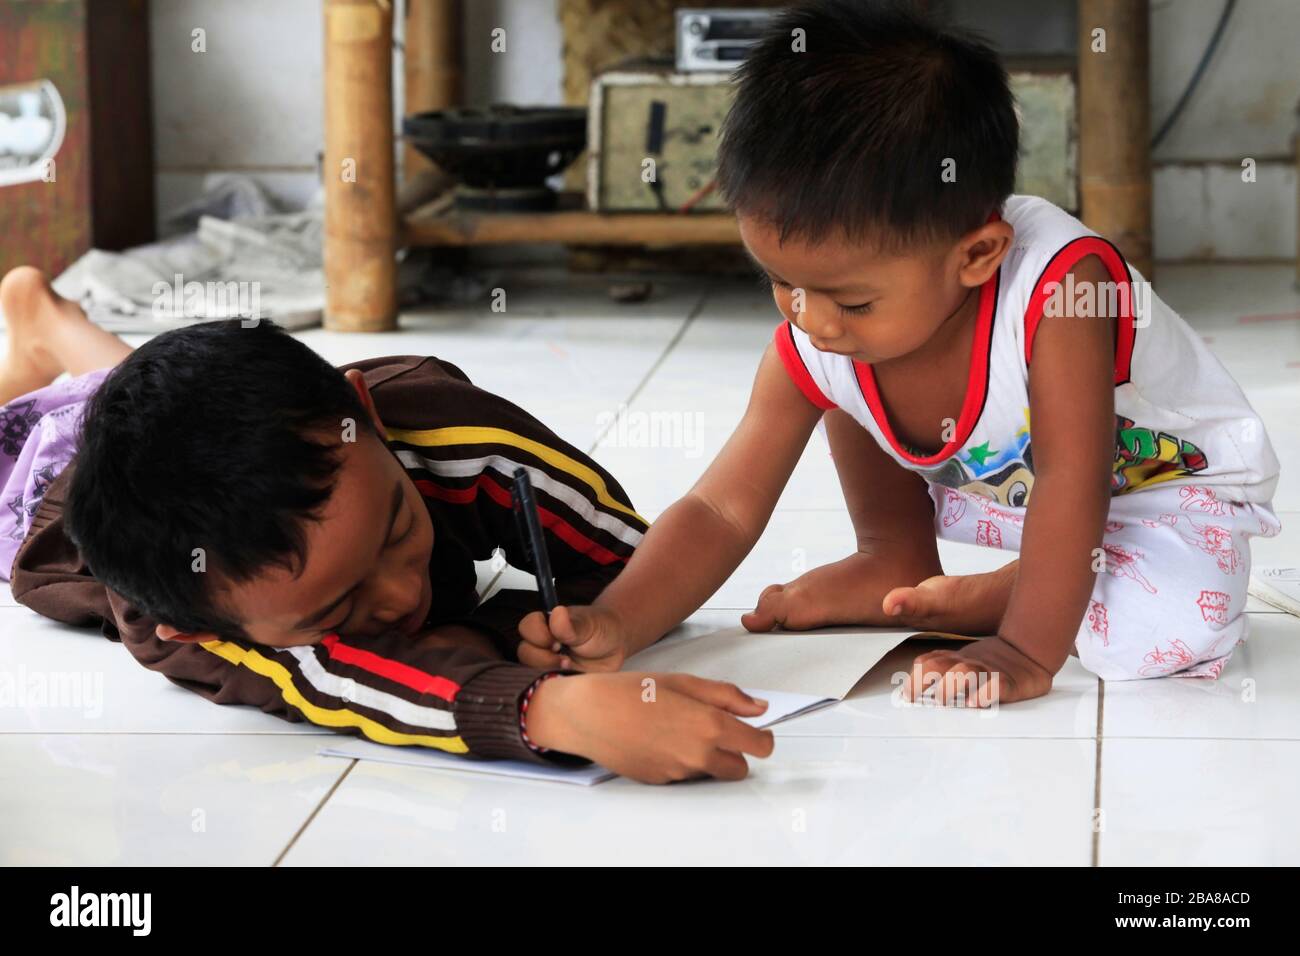 Bali, Indonesia - January 24, 2009: Children of an Indonesian artist paint while sitting on the floor. Bali is famous for talented artists. Bali, Indo Stock Photo